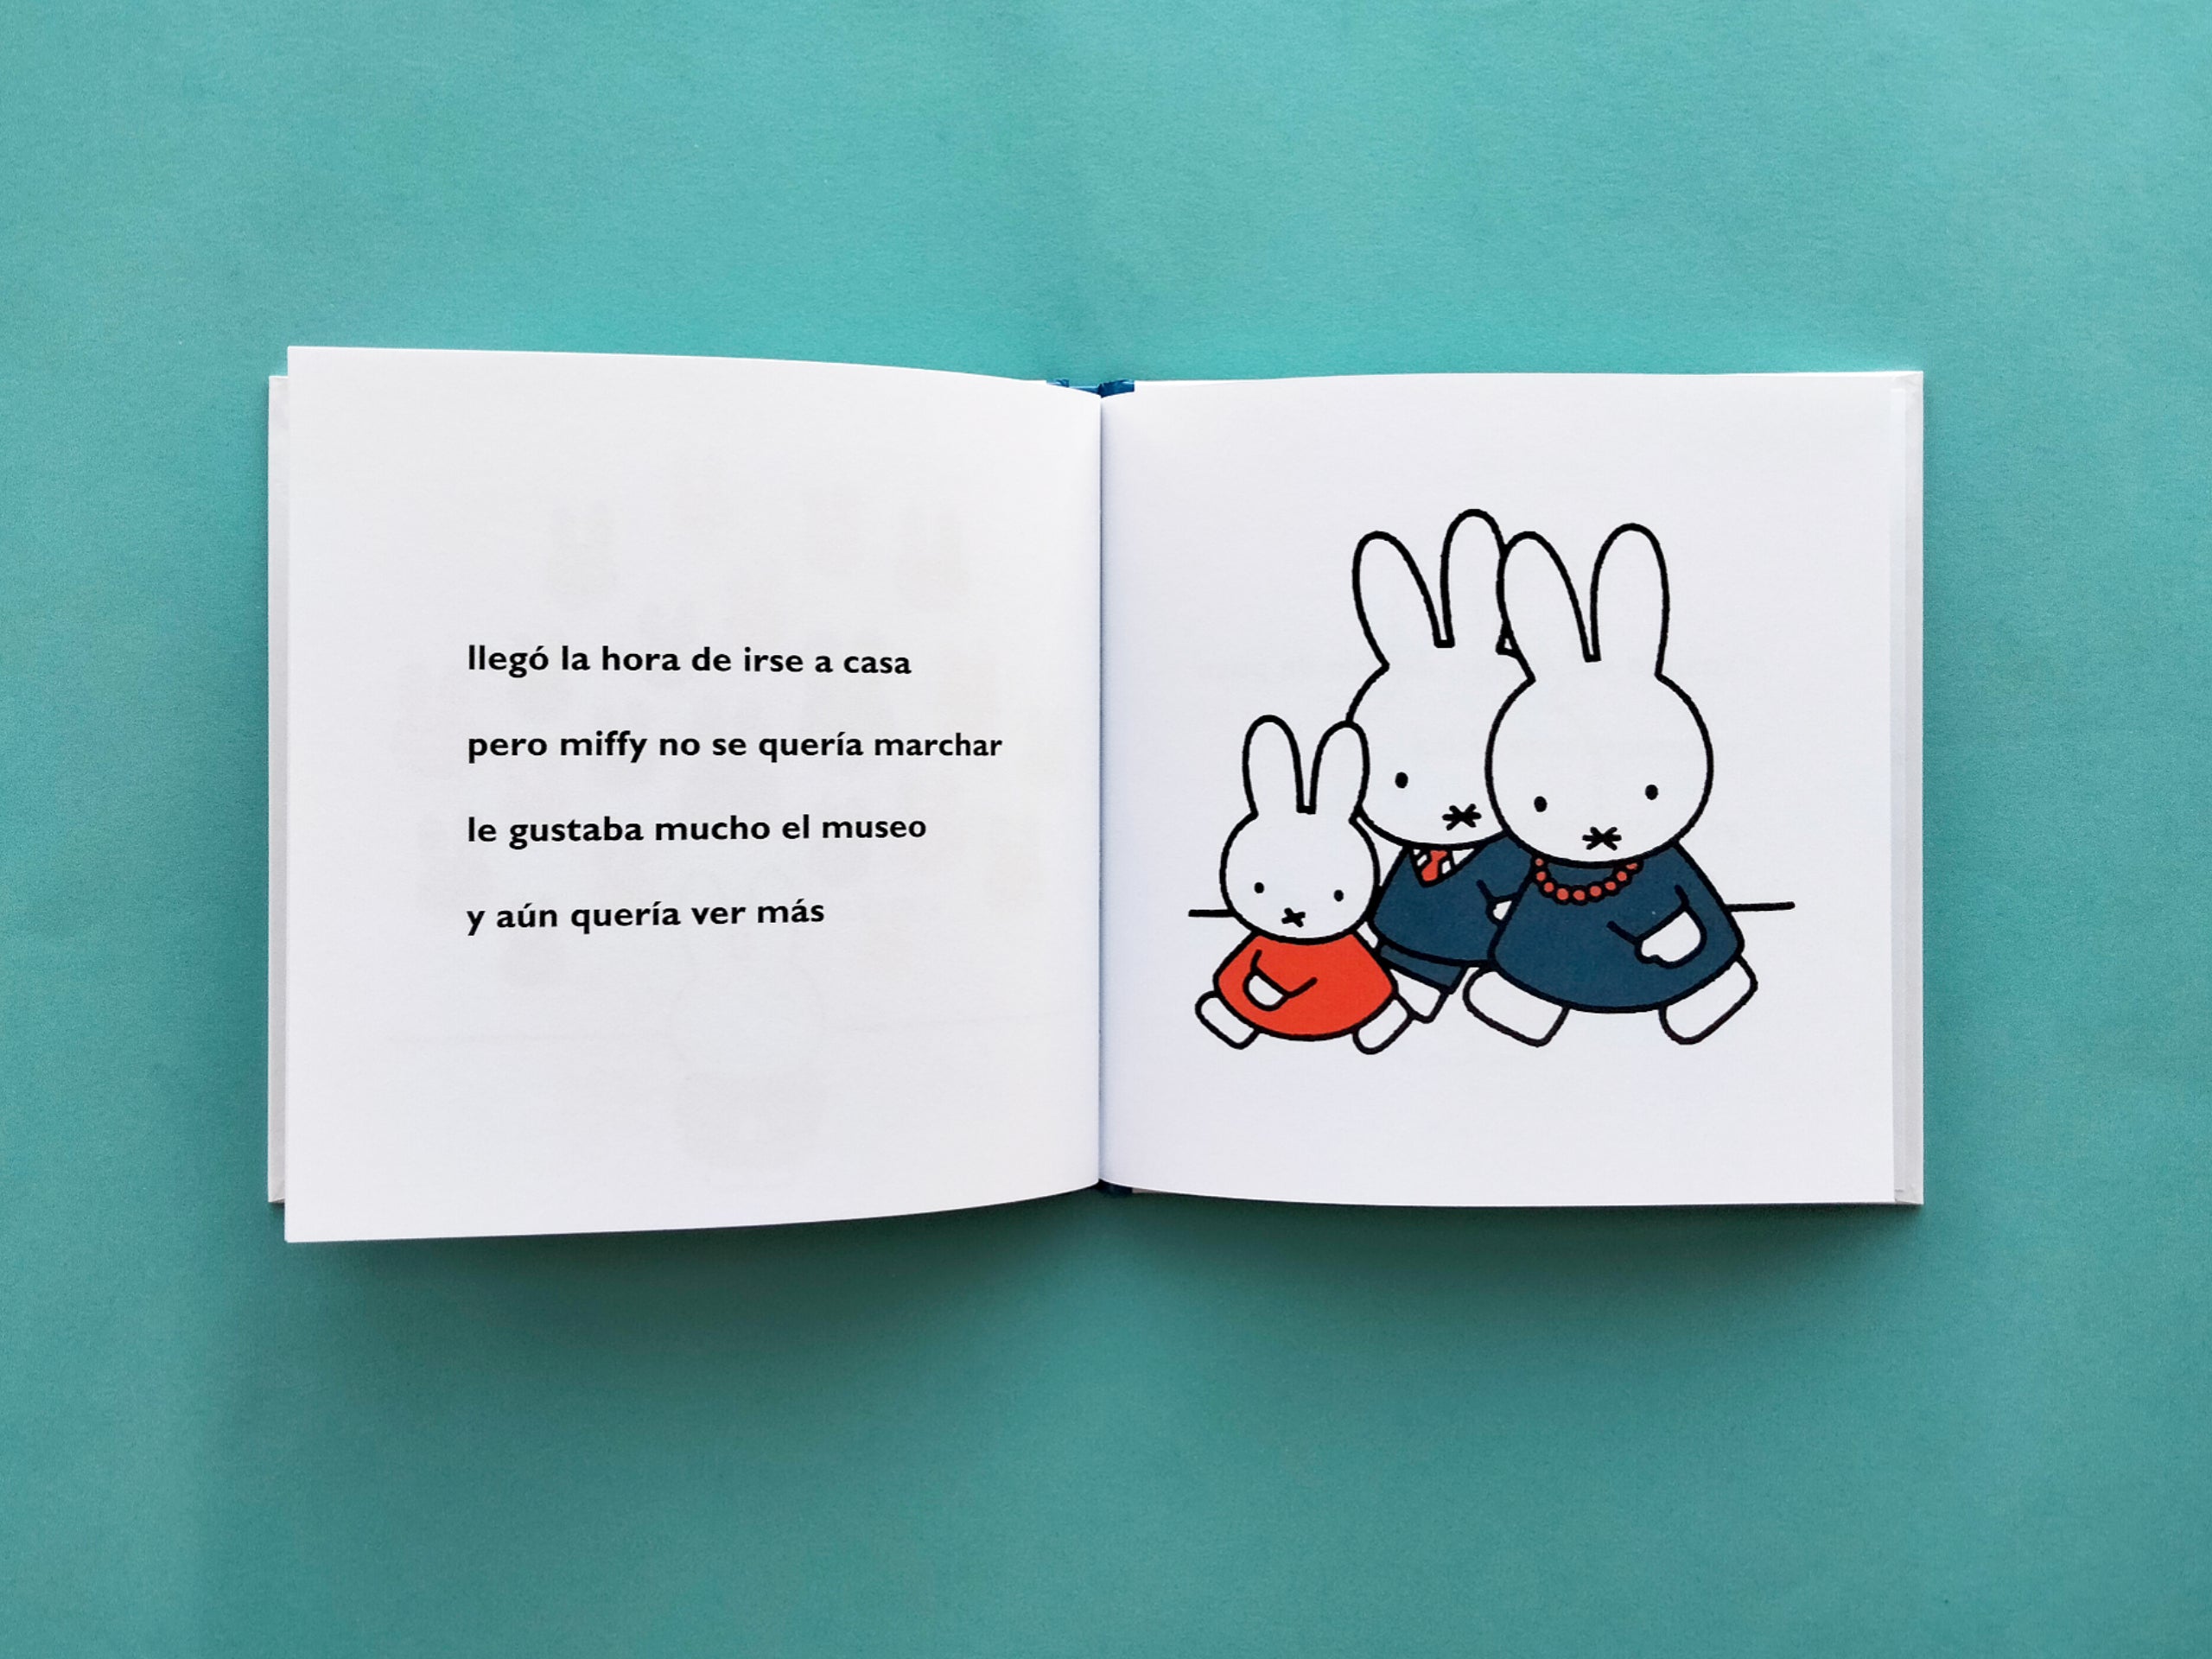 MIFFY GOES TO THE MUSEUM